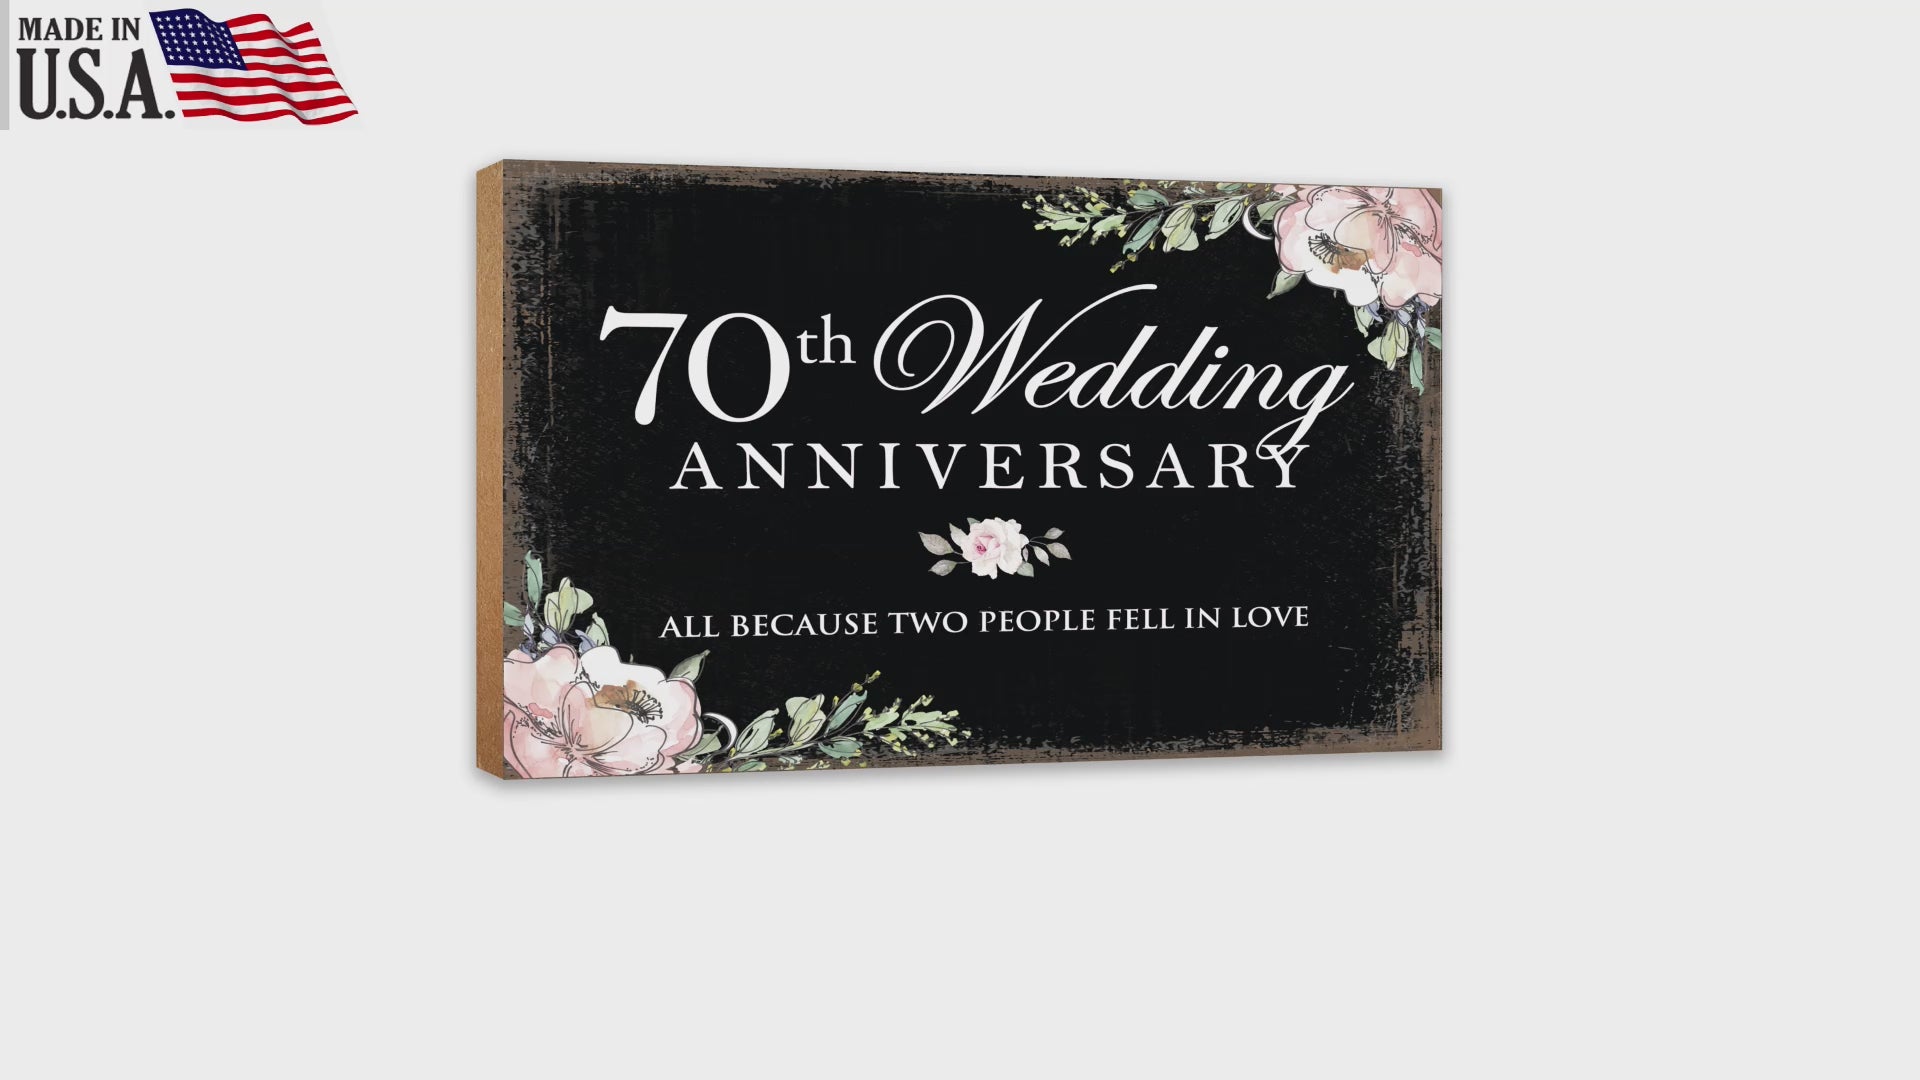 70th Wedding Anniversary Unique Shelf Decor and Tabletop Signs Gift for Couples - Fell In Love